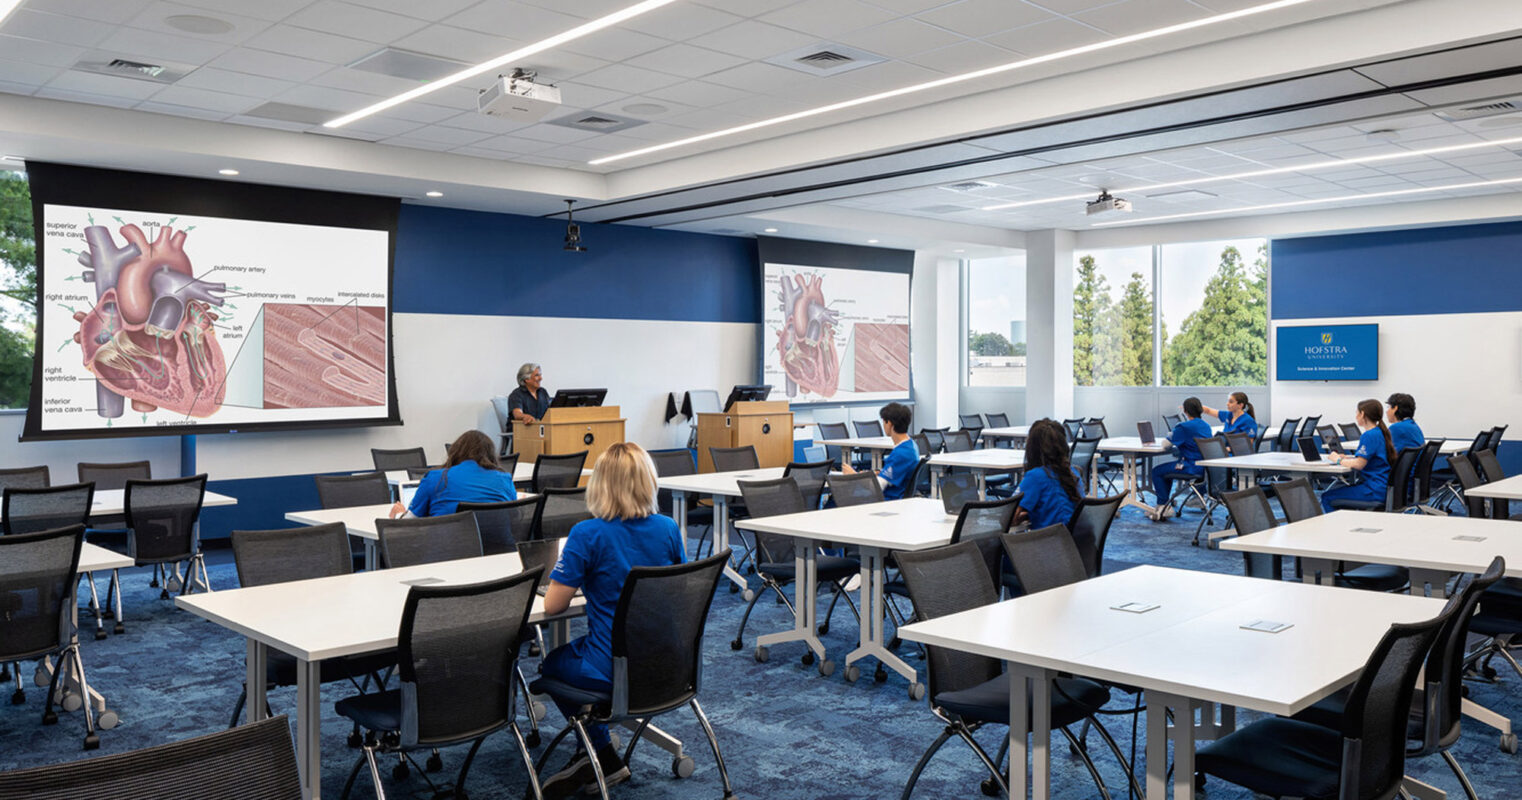 Spacious classroom featuring modern movable tables and chairs with a blue and white color scheme. The front wall displays a large projection screen, while ample natural light enhances the learning environment.